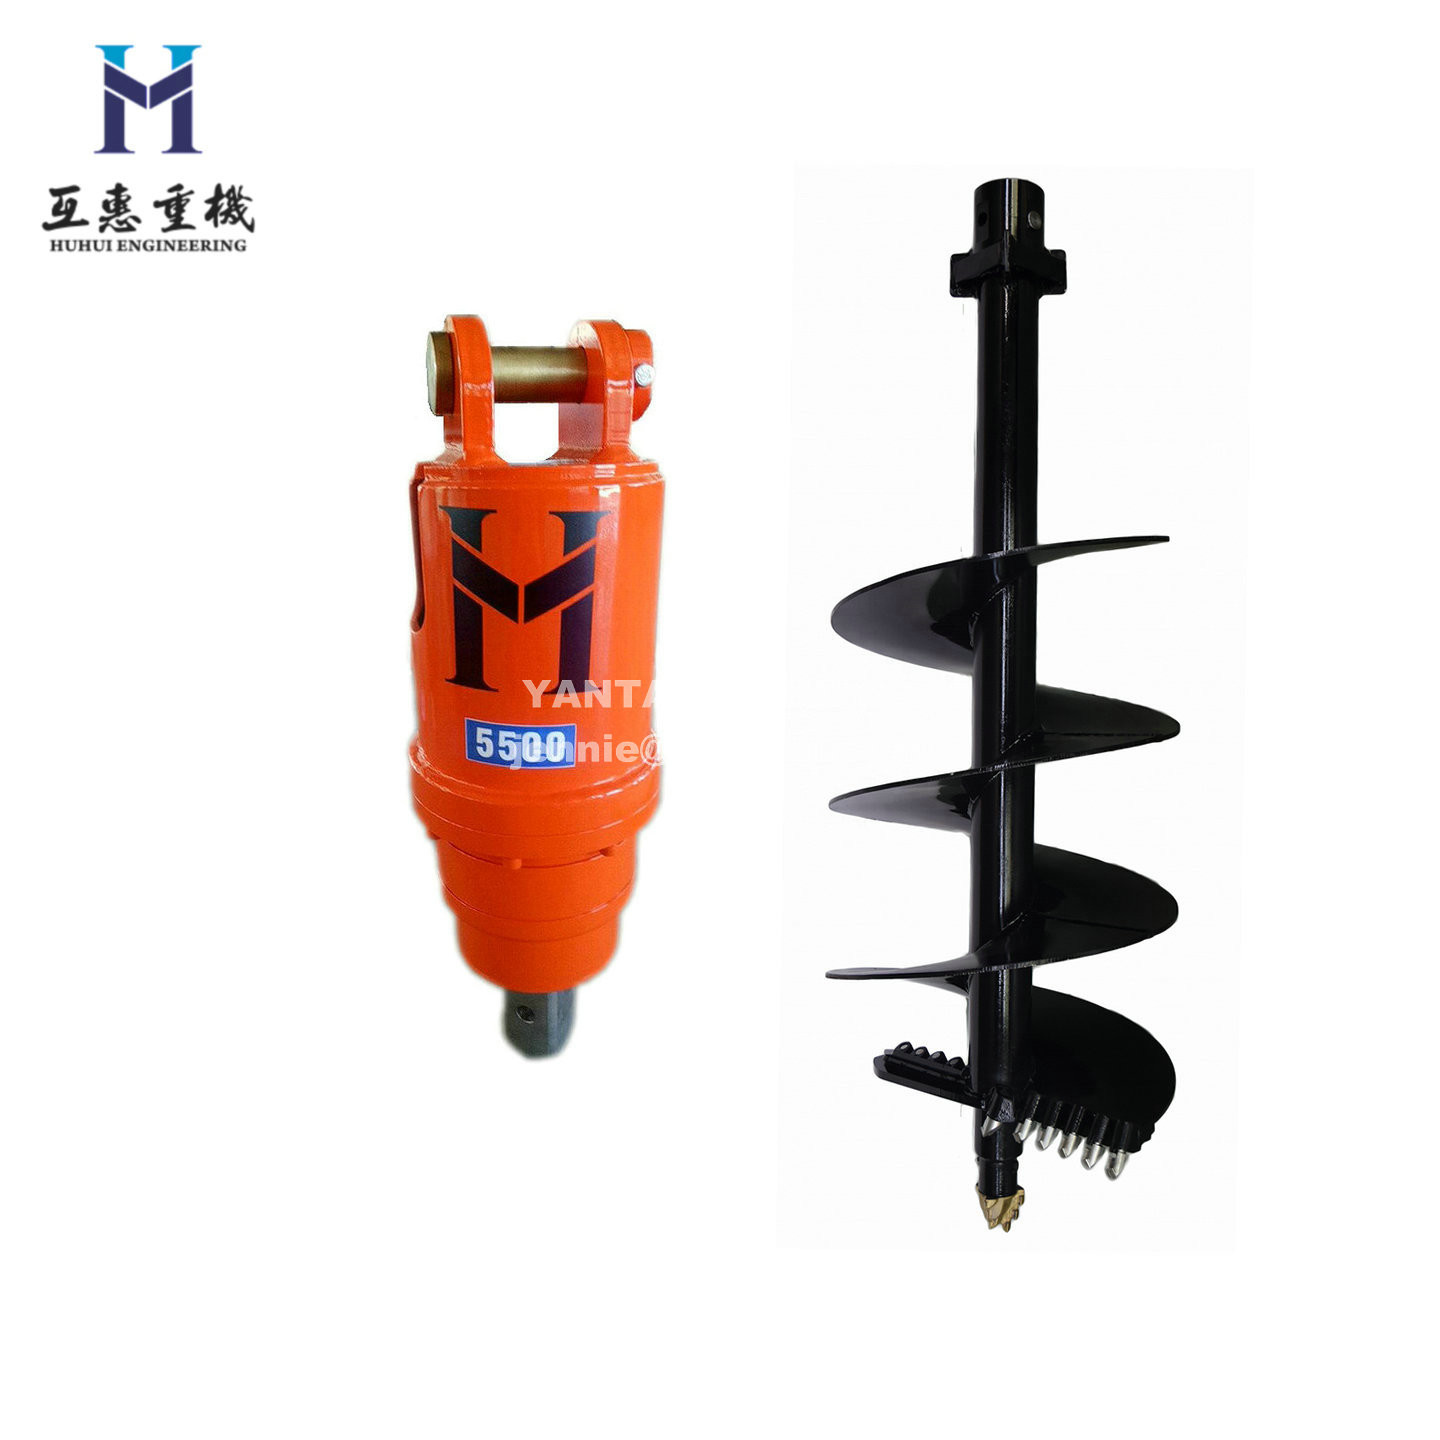 Mini Digger Ground Auger Hydraulic Earth Drill with Rock Bit